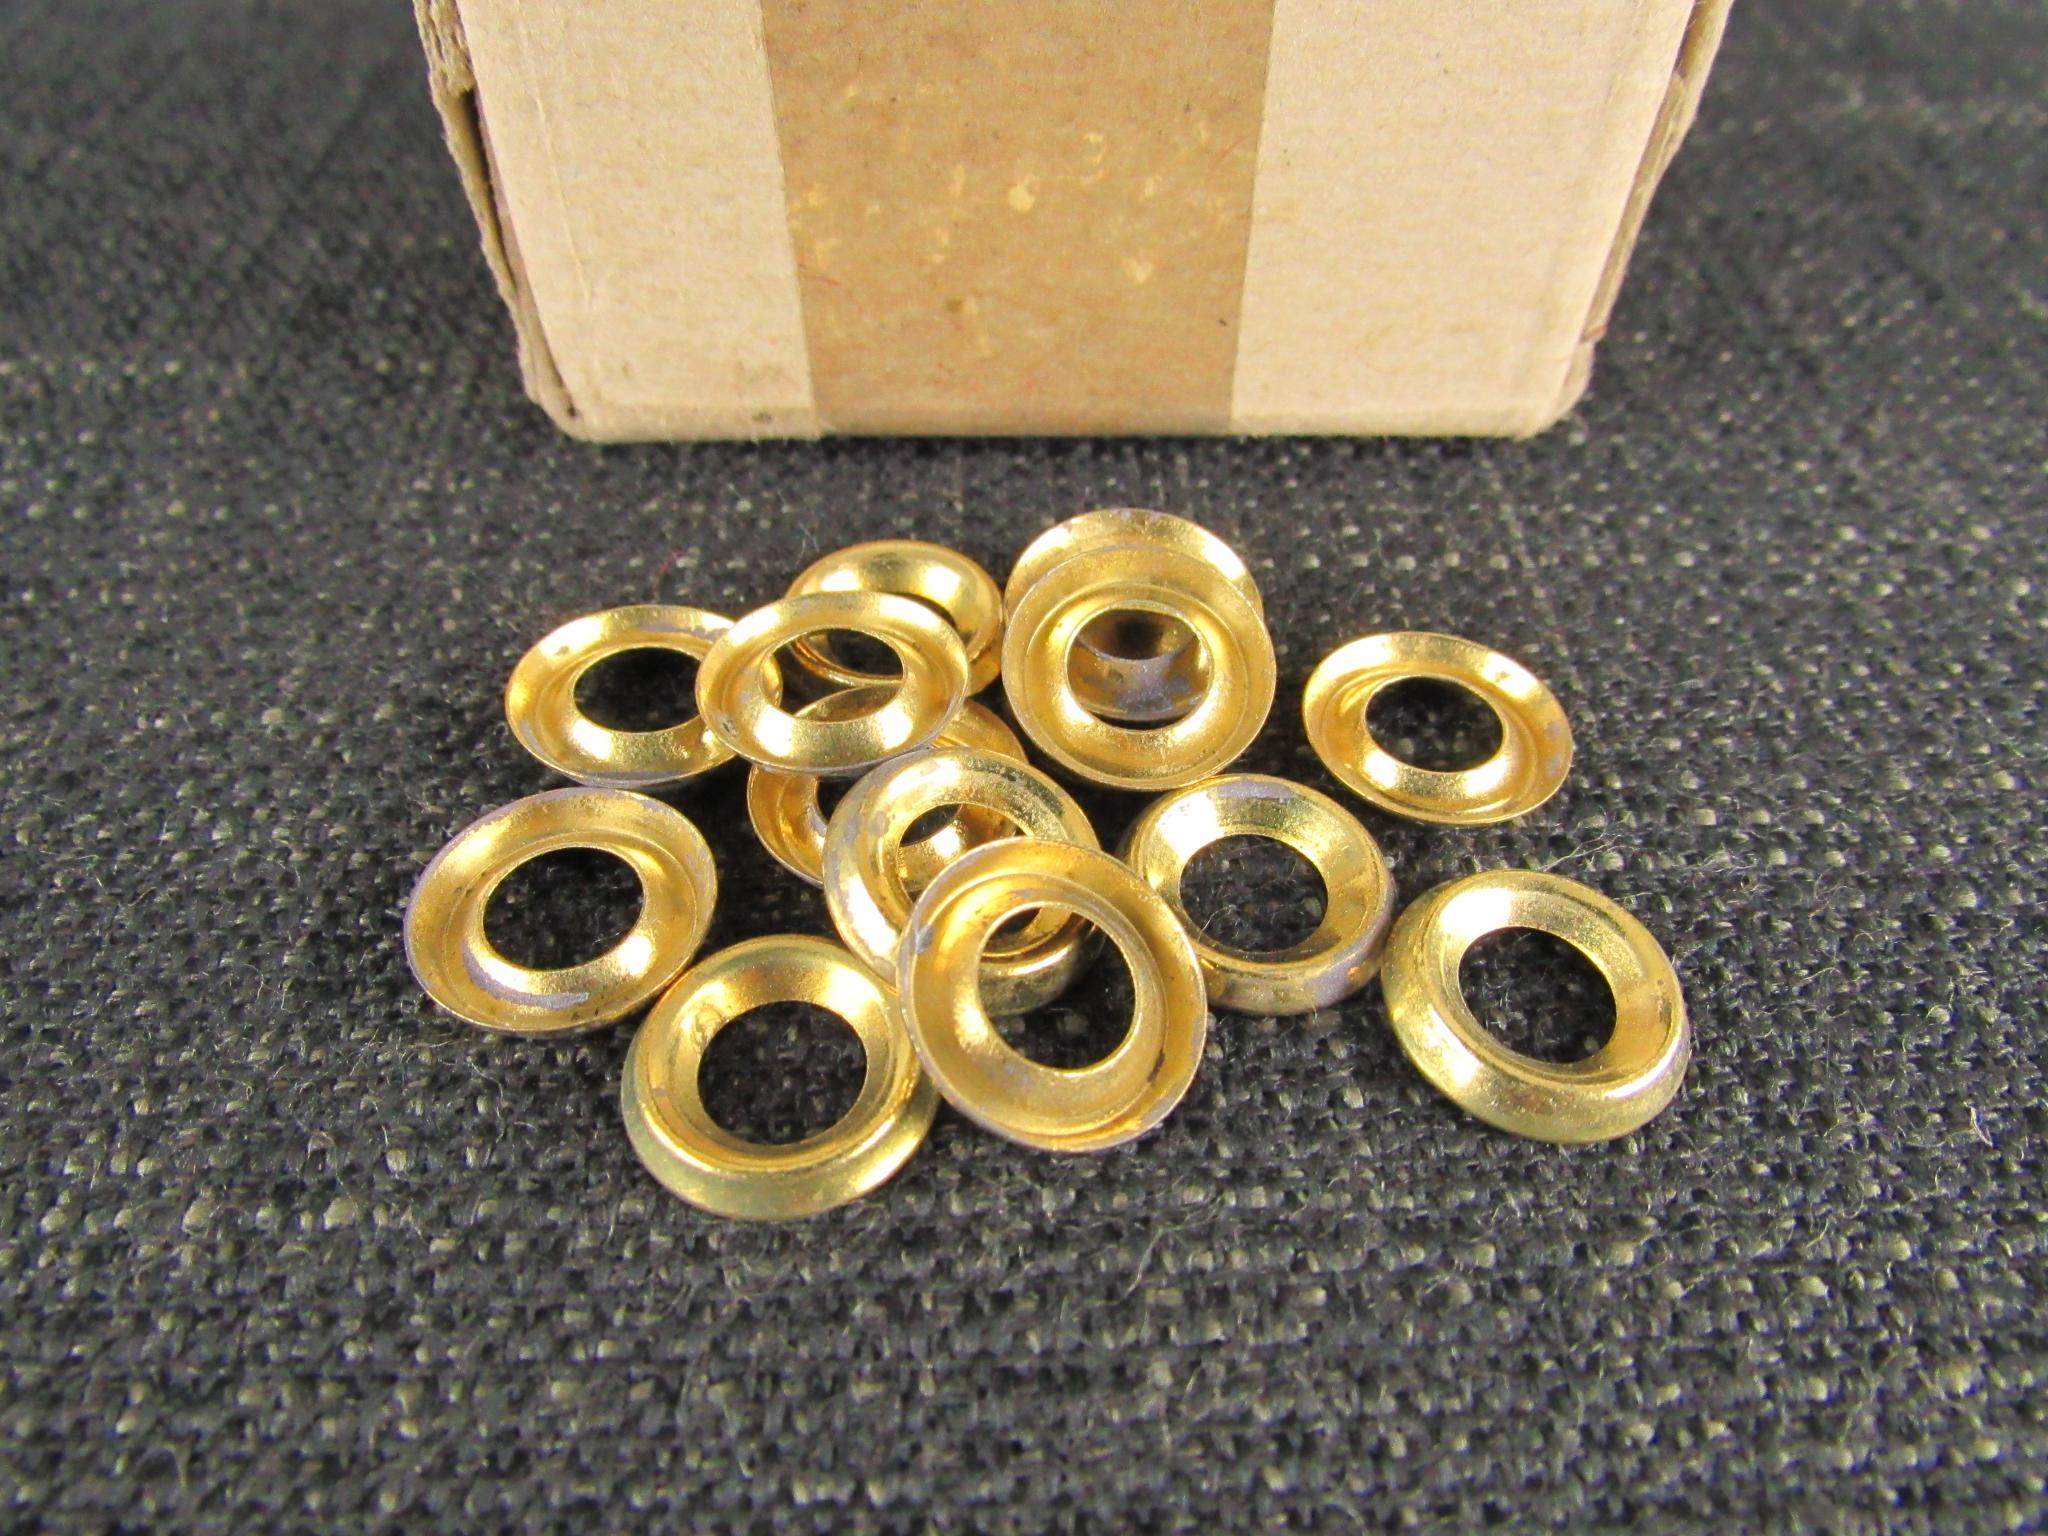 50 Brass Cup Washers - Size 10